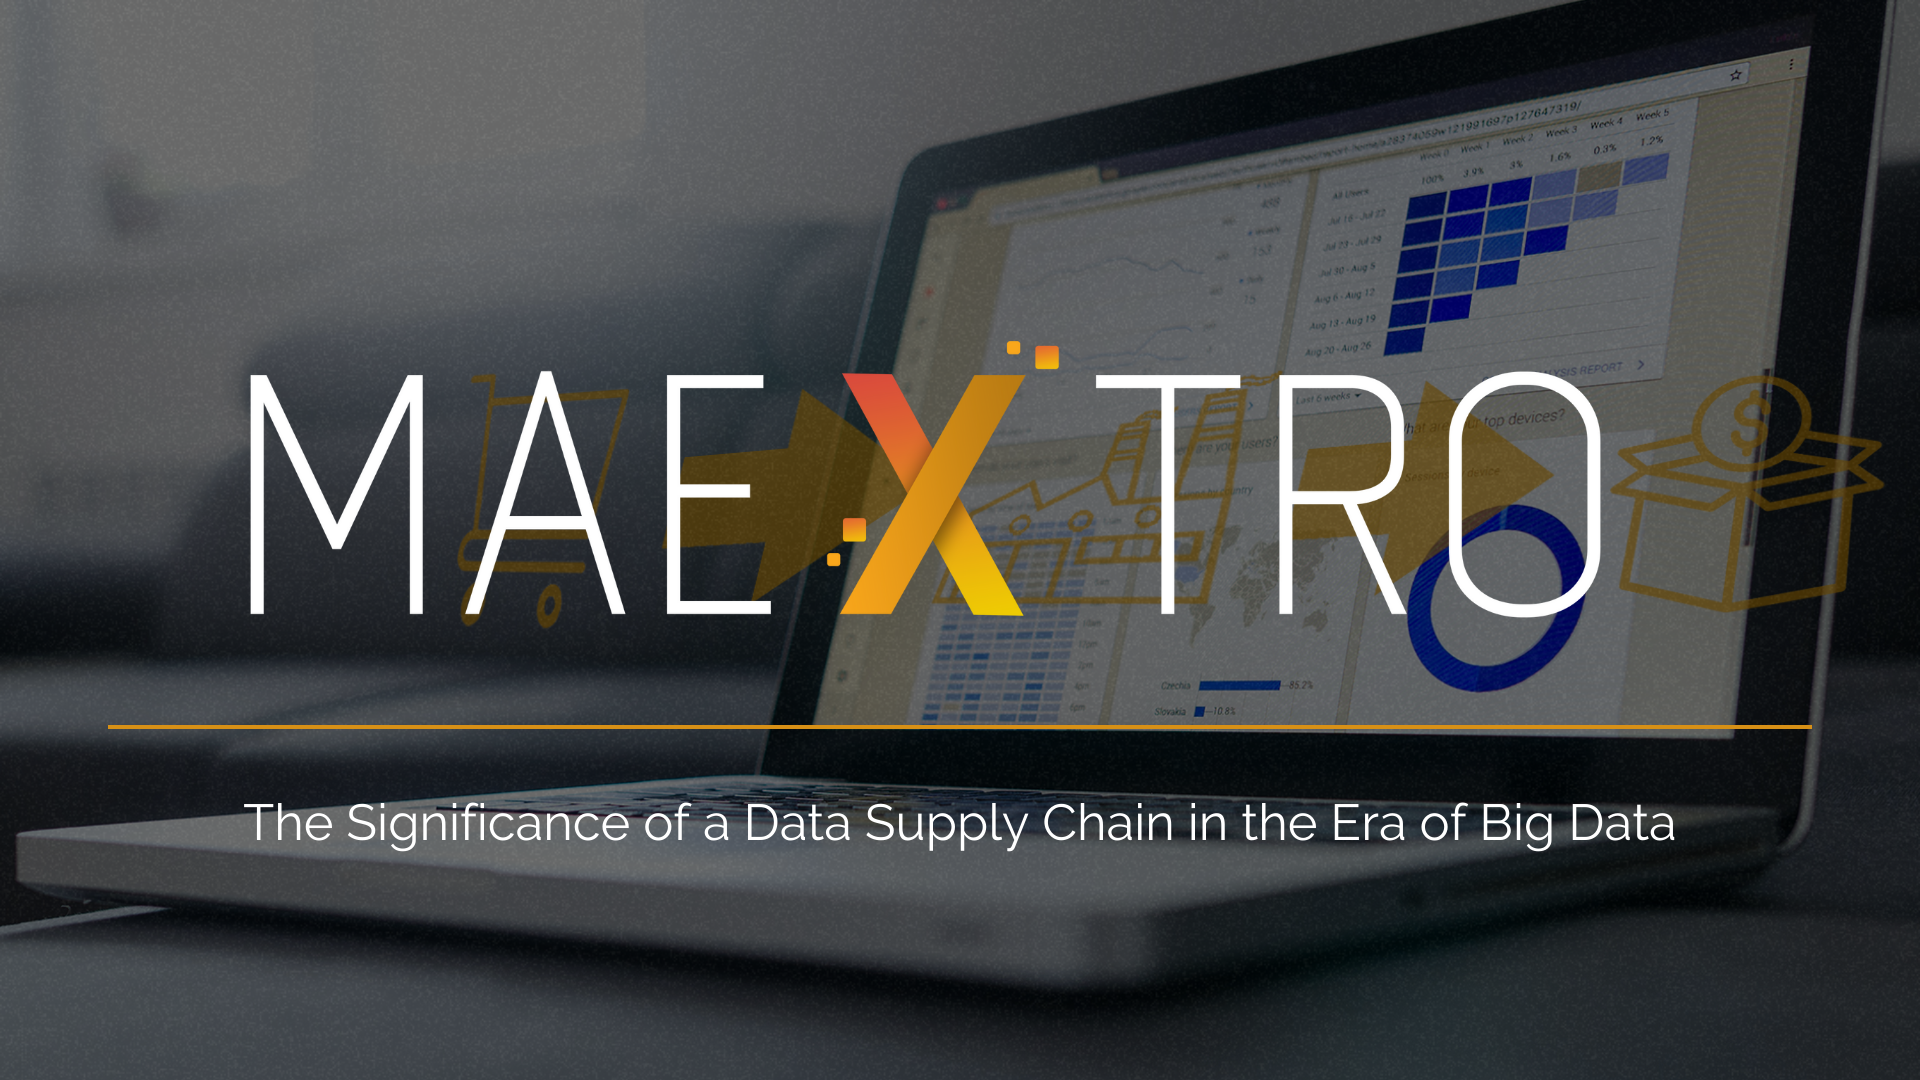 The Significance of a Data Supply Chain in the Era of Big Data